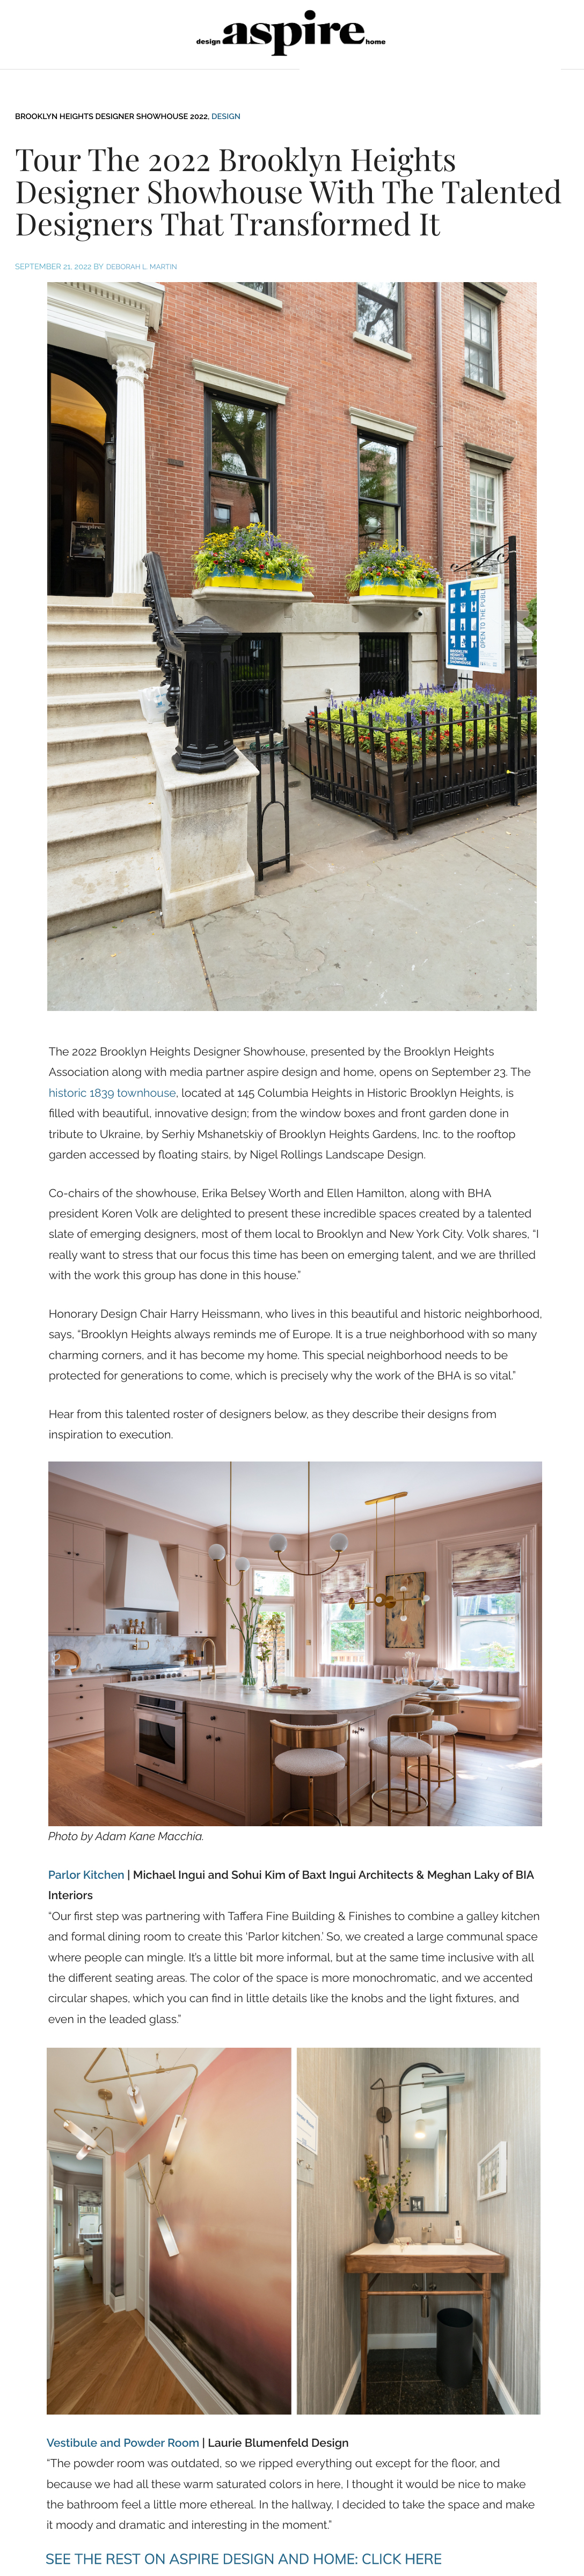 Aspire Design and Home - Tour The 2022 Brooklyn Heights Designer Showhouse With The Talented Designers That Transformed It